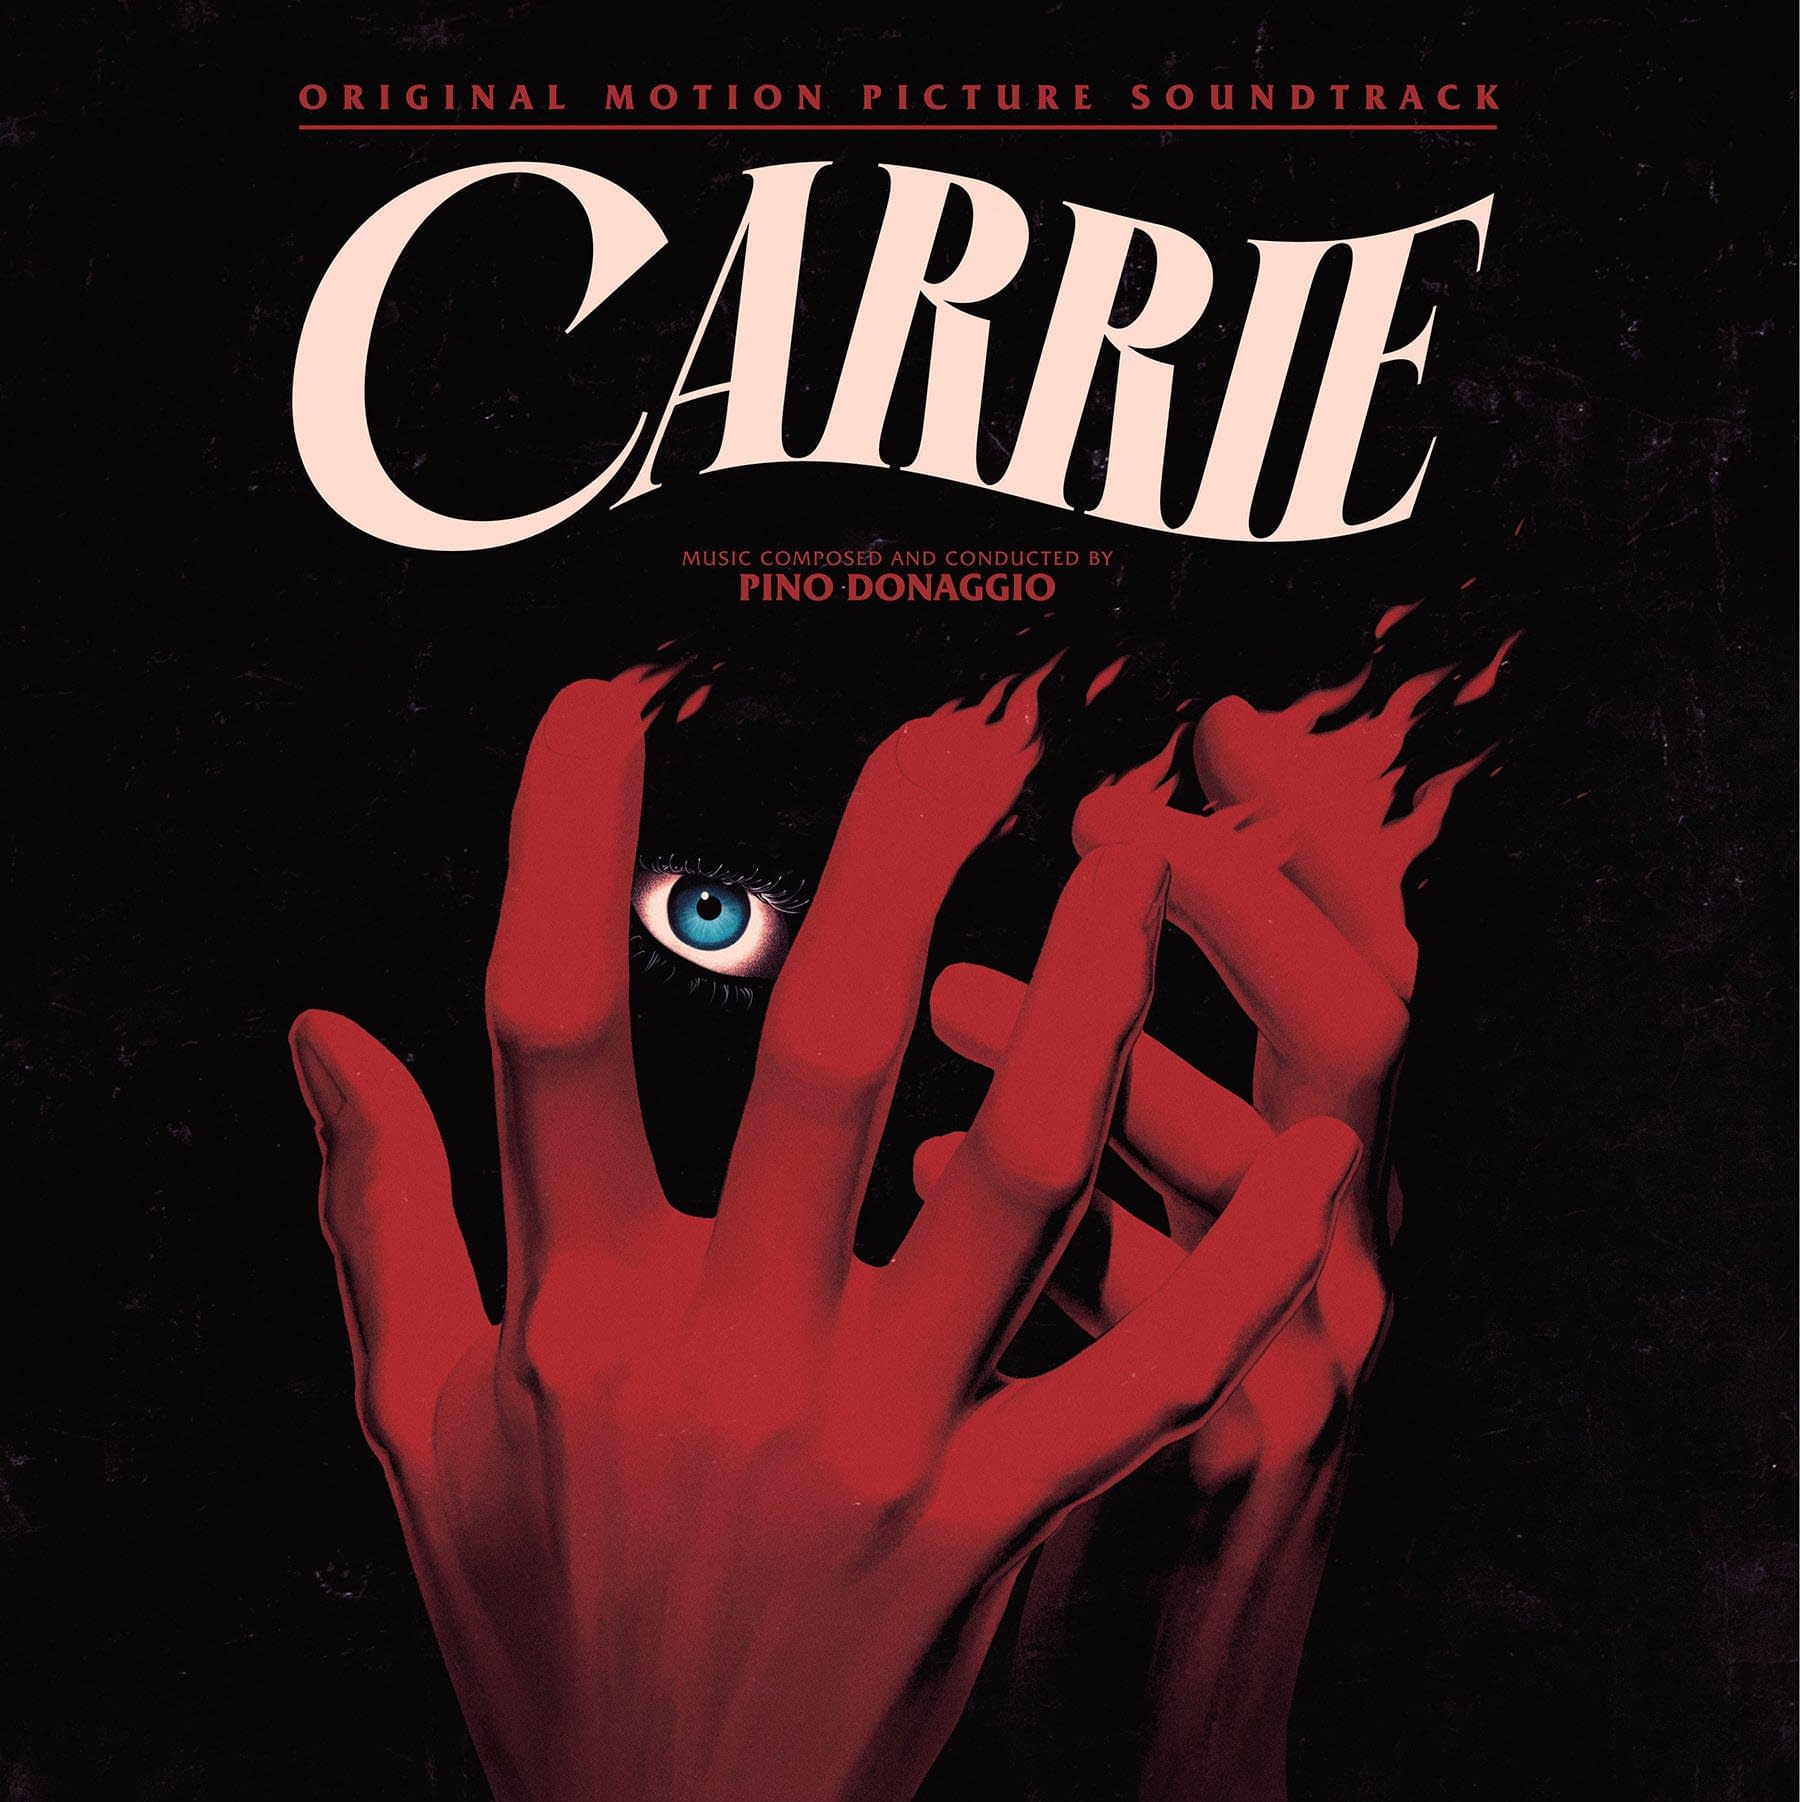 Carrie Soundtrack Available To Order From Waxwork Records